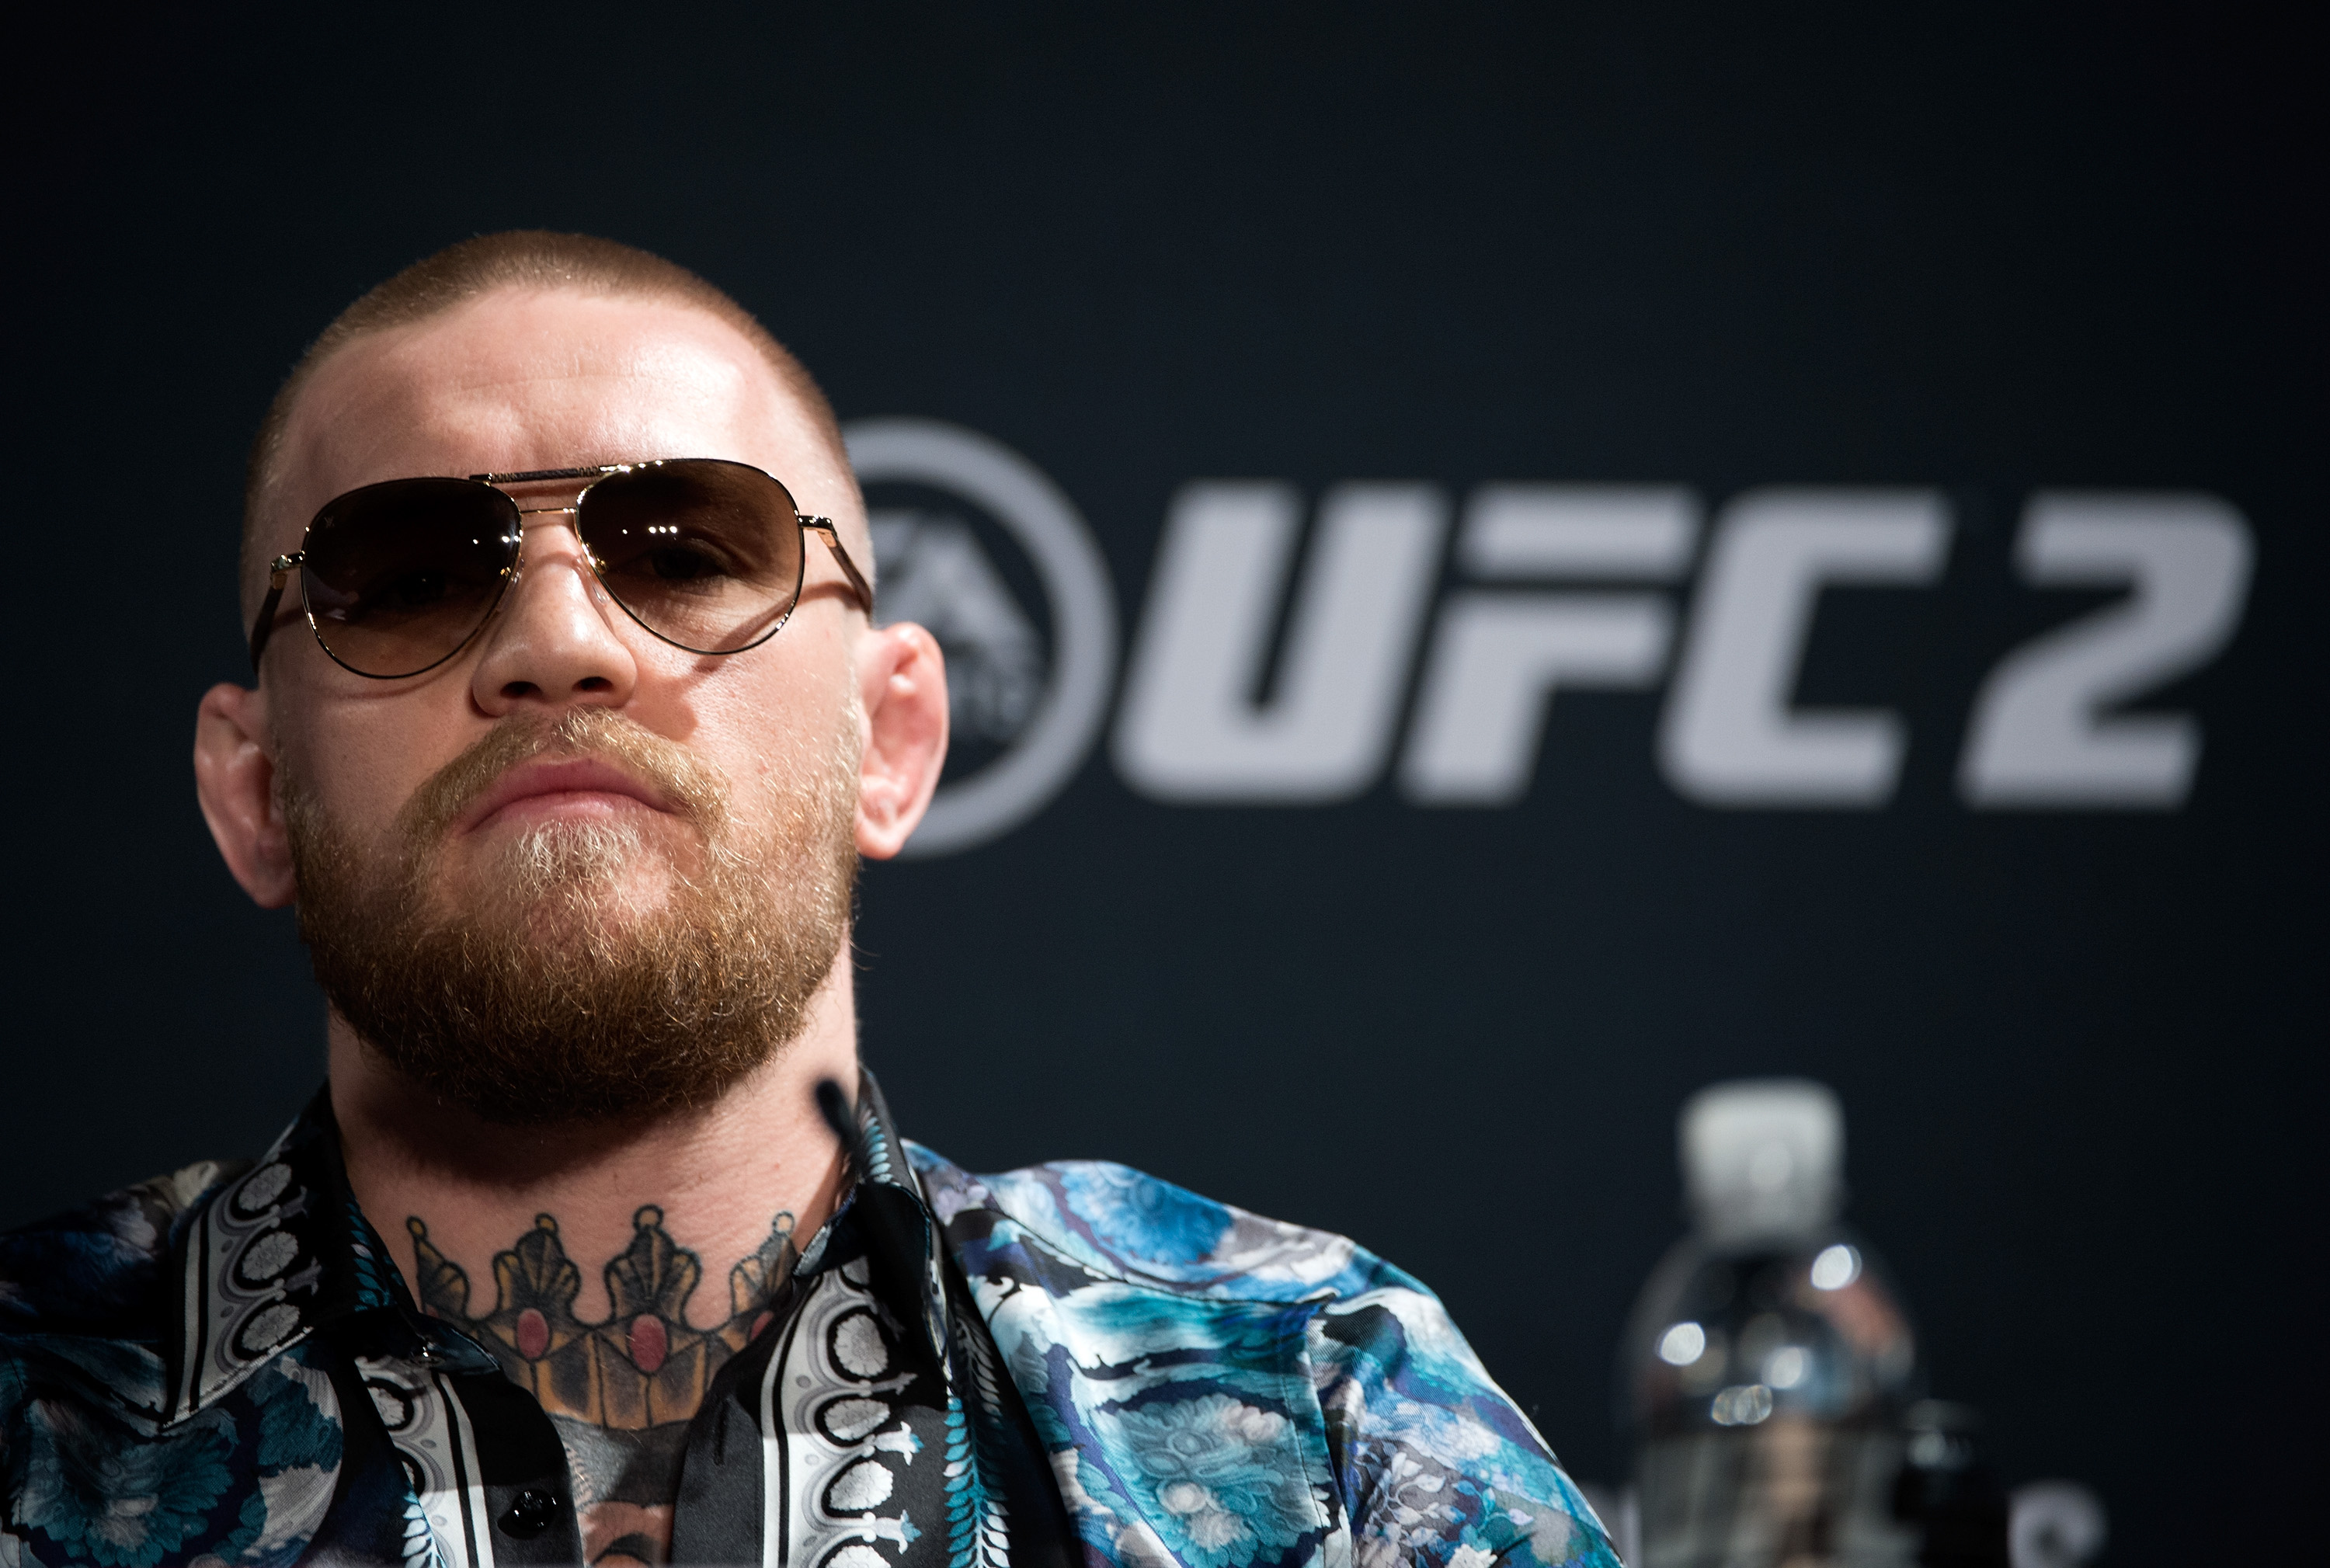 Conor McGregor HD Wallpapers Free Download in High Quality and Resolution3000 x 2019